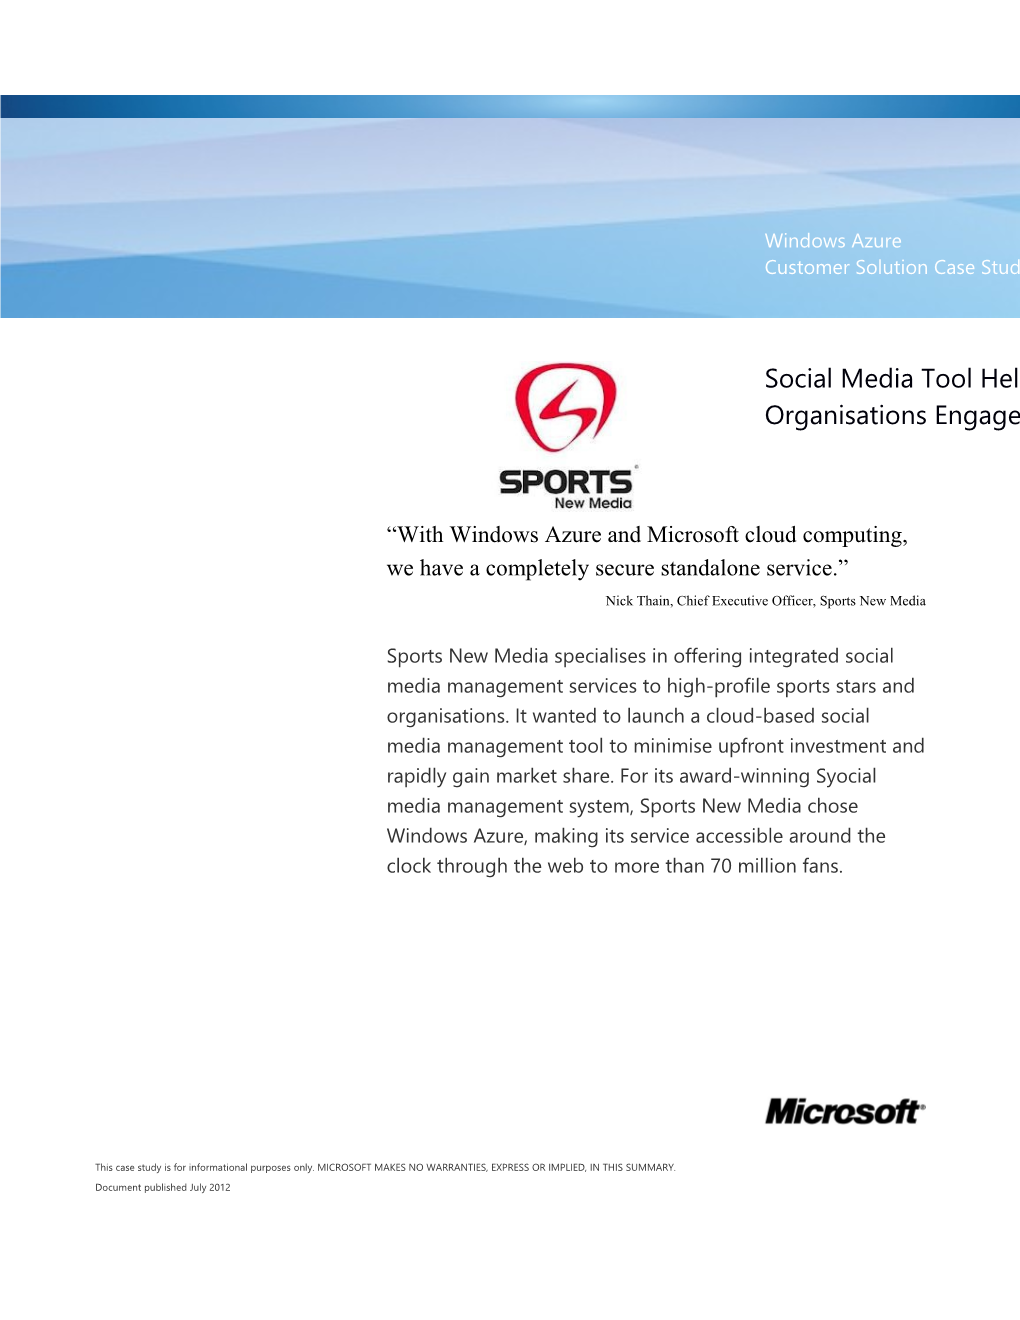 Writeimage CSB Social Media Tool Helps Wayne Rooney, Rio Ferdinand, and UEFA Engage With